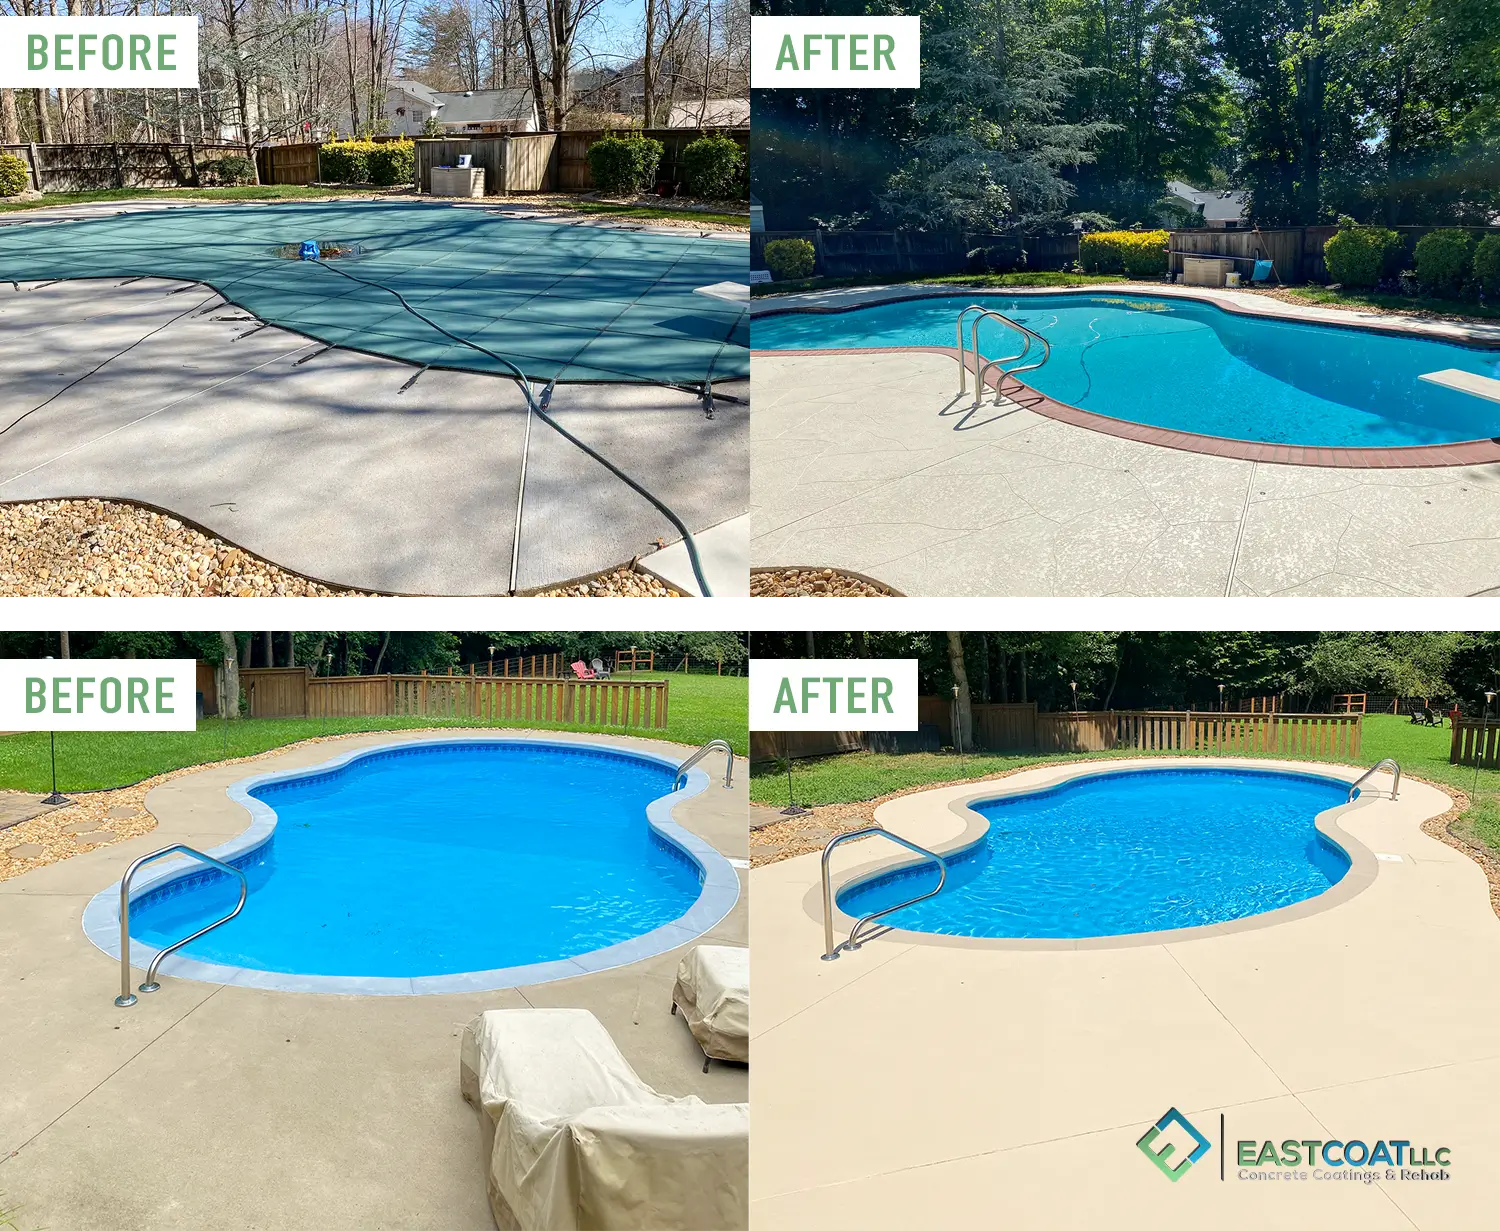 Eastcoat-Before-After-Pool-Deck-Two-Decks 2